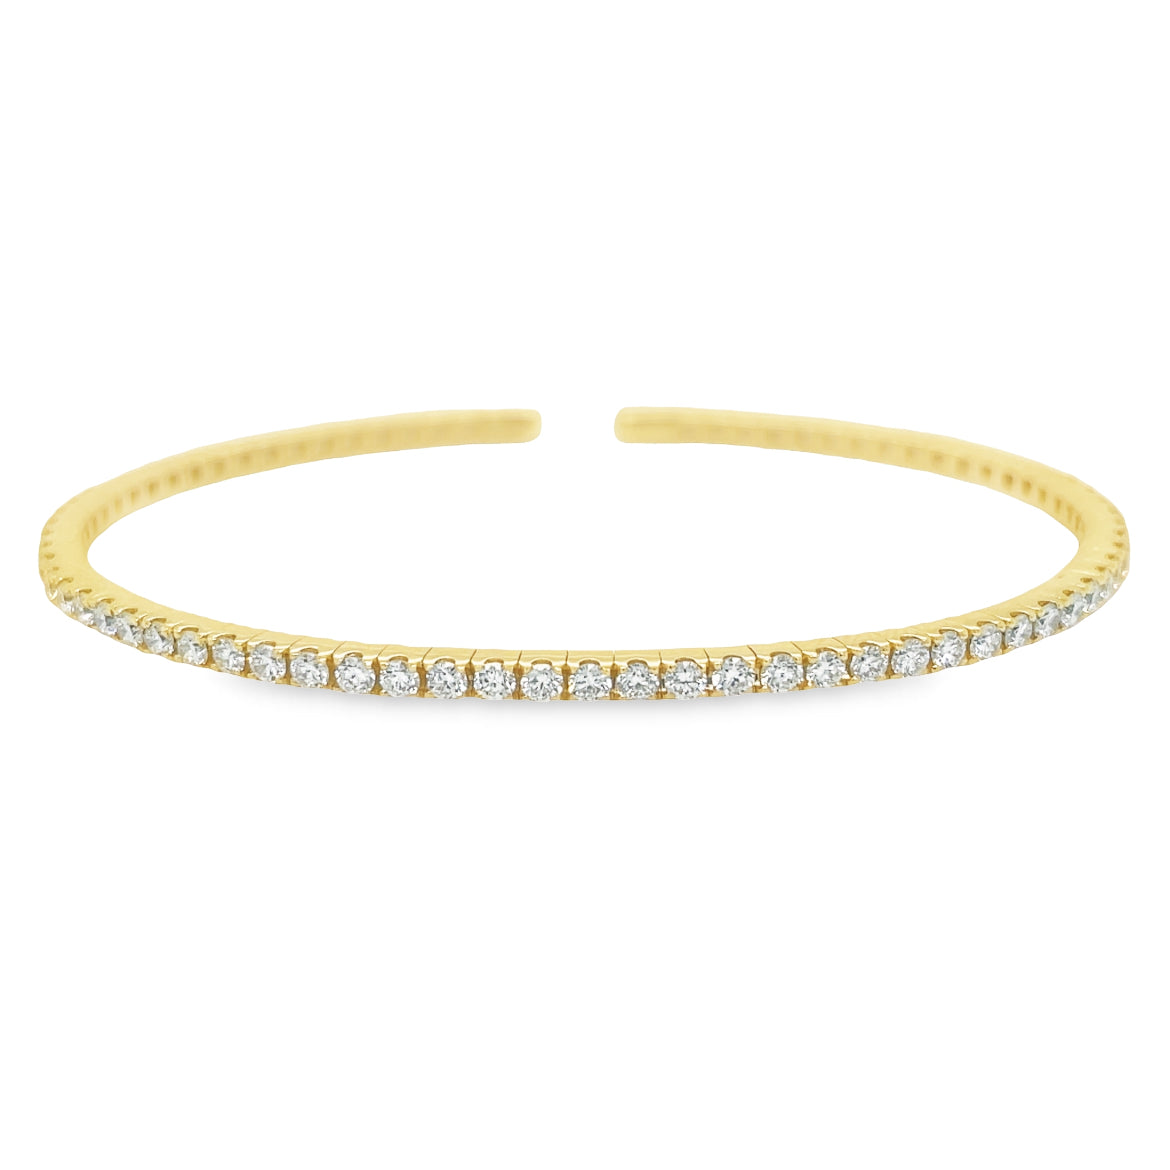 This diamond flexible yellow gold bangle is the perfect choice for effortless elegance. Crafted with 1.32 cts of brilliant diamonds, it slips on easily for glamorous style. Add a classic touch to any look with this timeless piece.